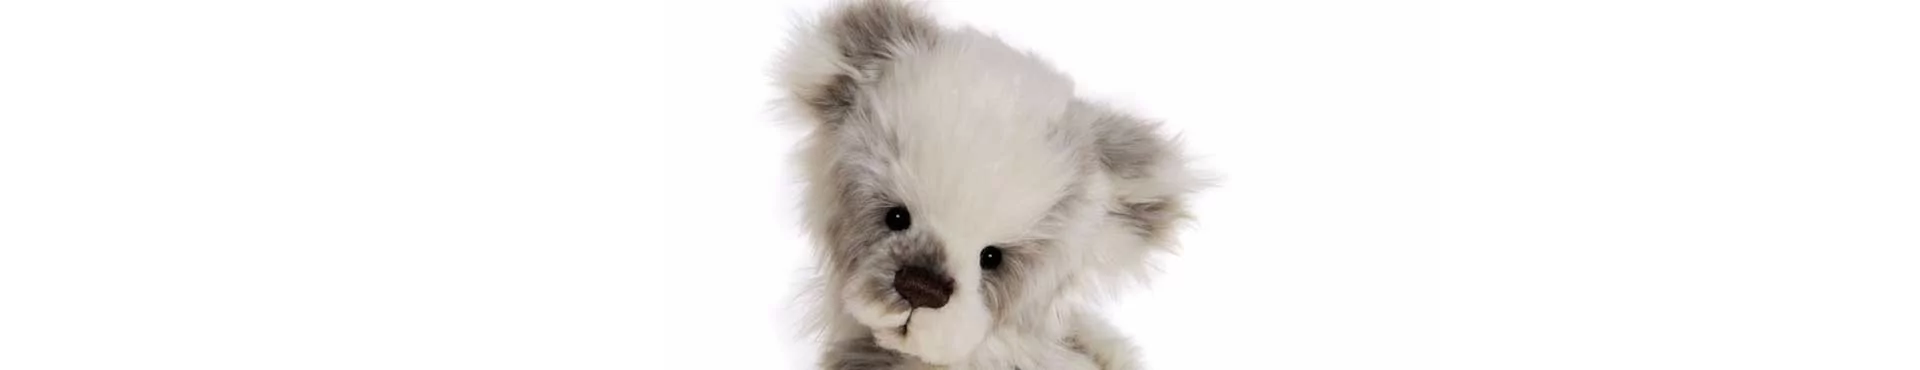 Ours en peluche Charlie Bears, peluches ours de collection